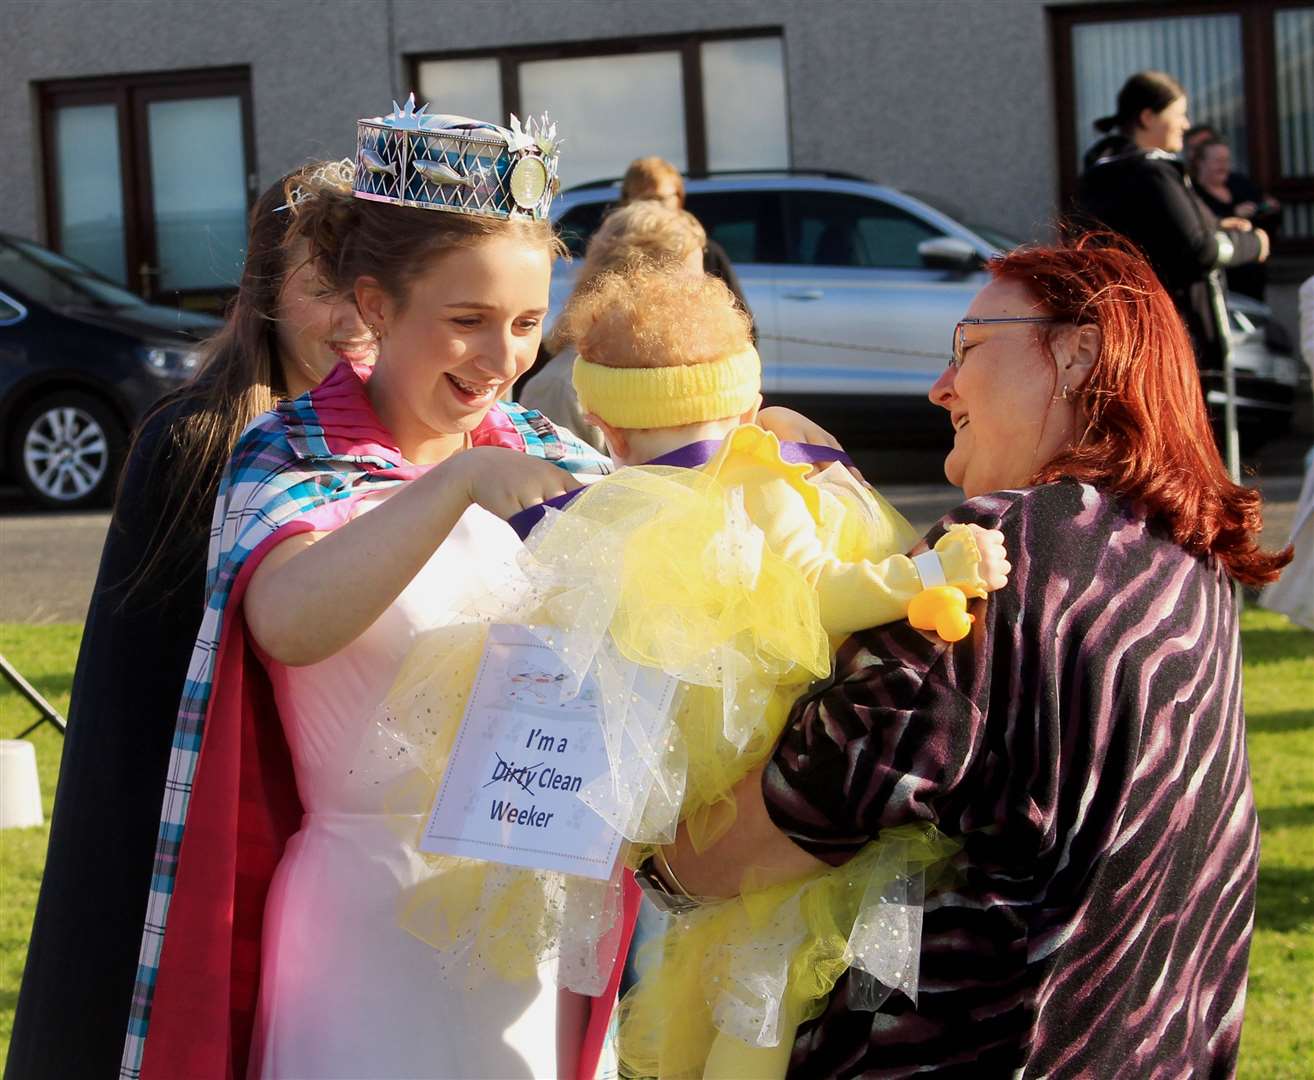 Gala queen Abby Dunbar presents a medal to a 'Clean Weeker' at the fancy dress parade. Picture: Alan Hendry